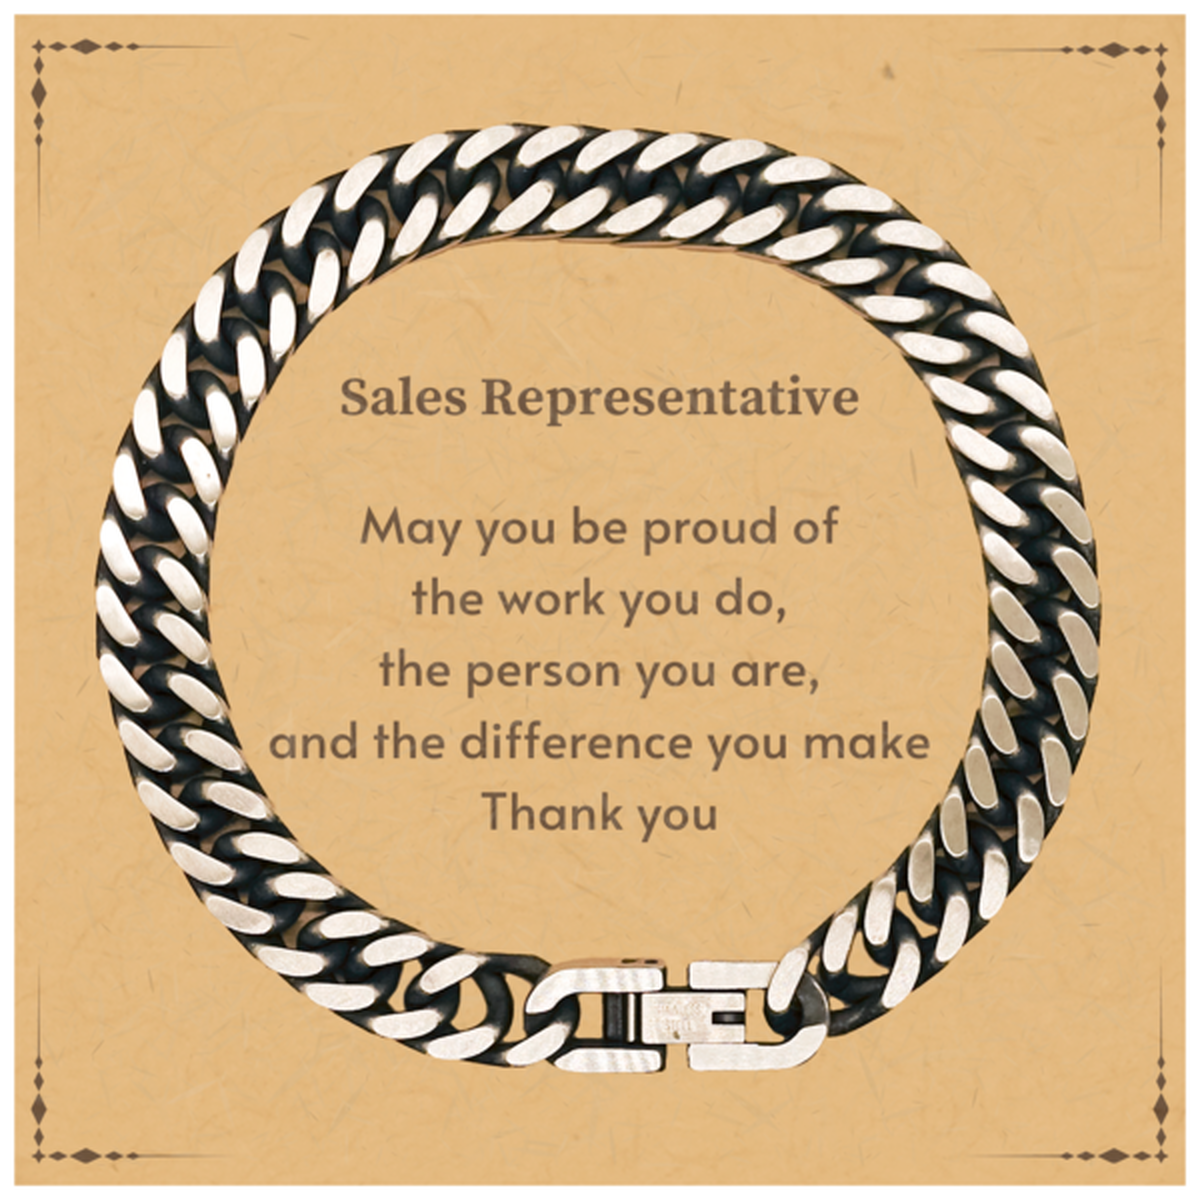 Heartwarming Cuban Link Chain Bracelet Retirement Coworkers Gifts for Sales Representative, Sales Representative May You be proud of the work you do, the person you are Gifts for Boss Men Women Friends